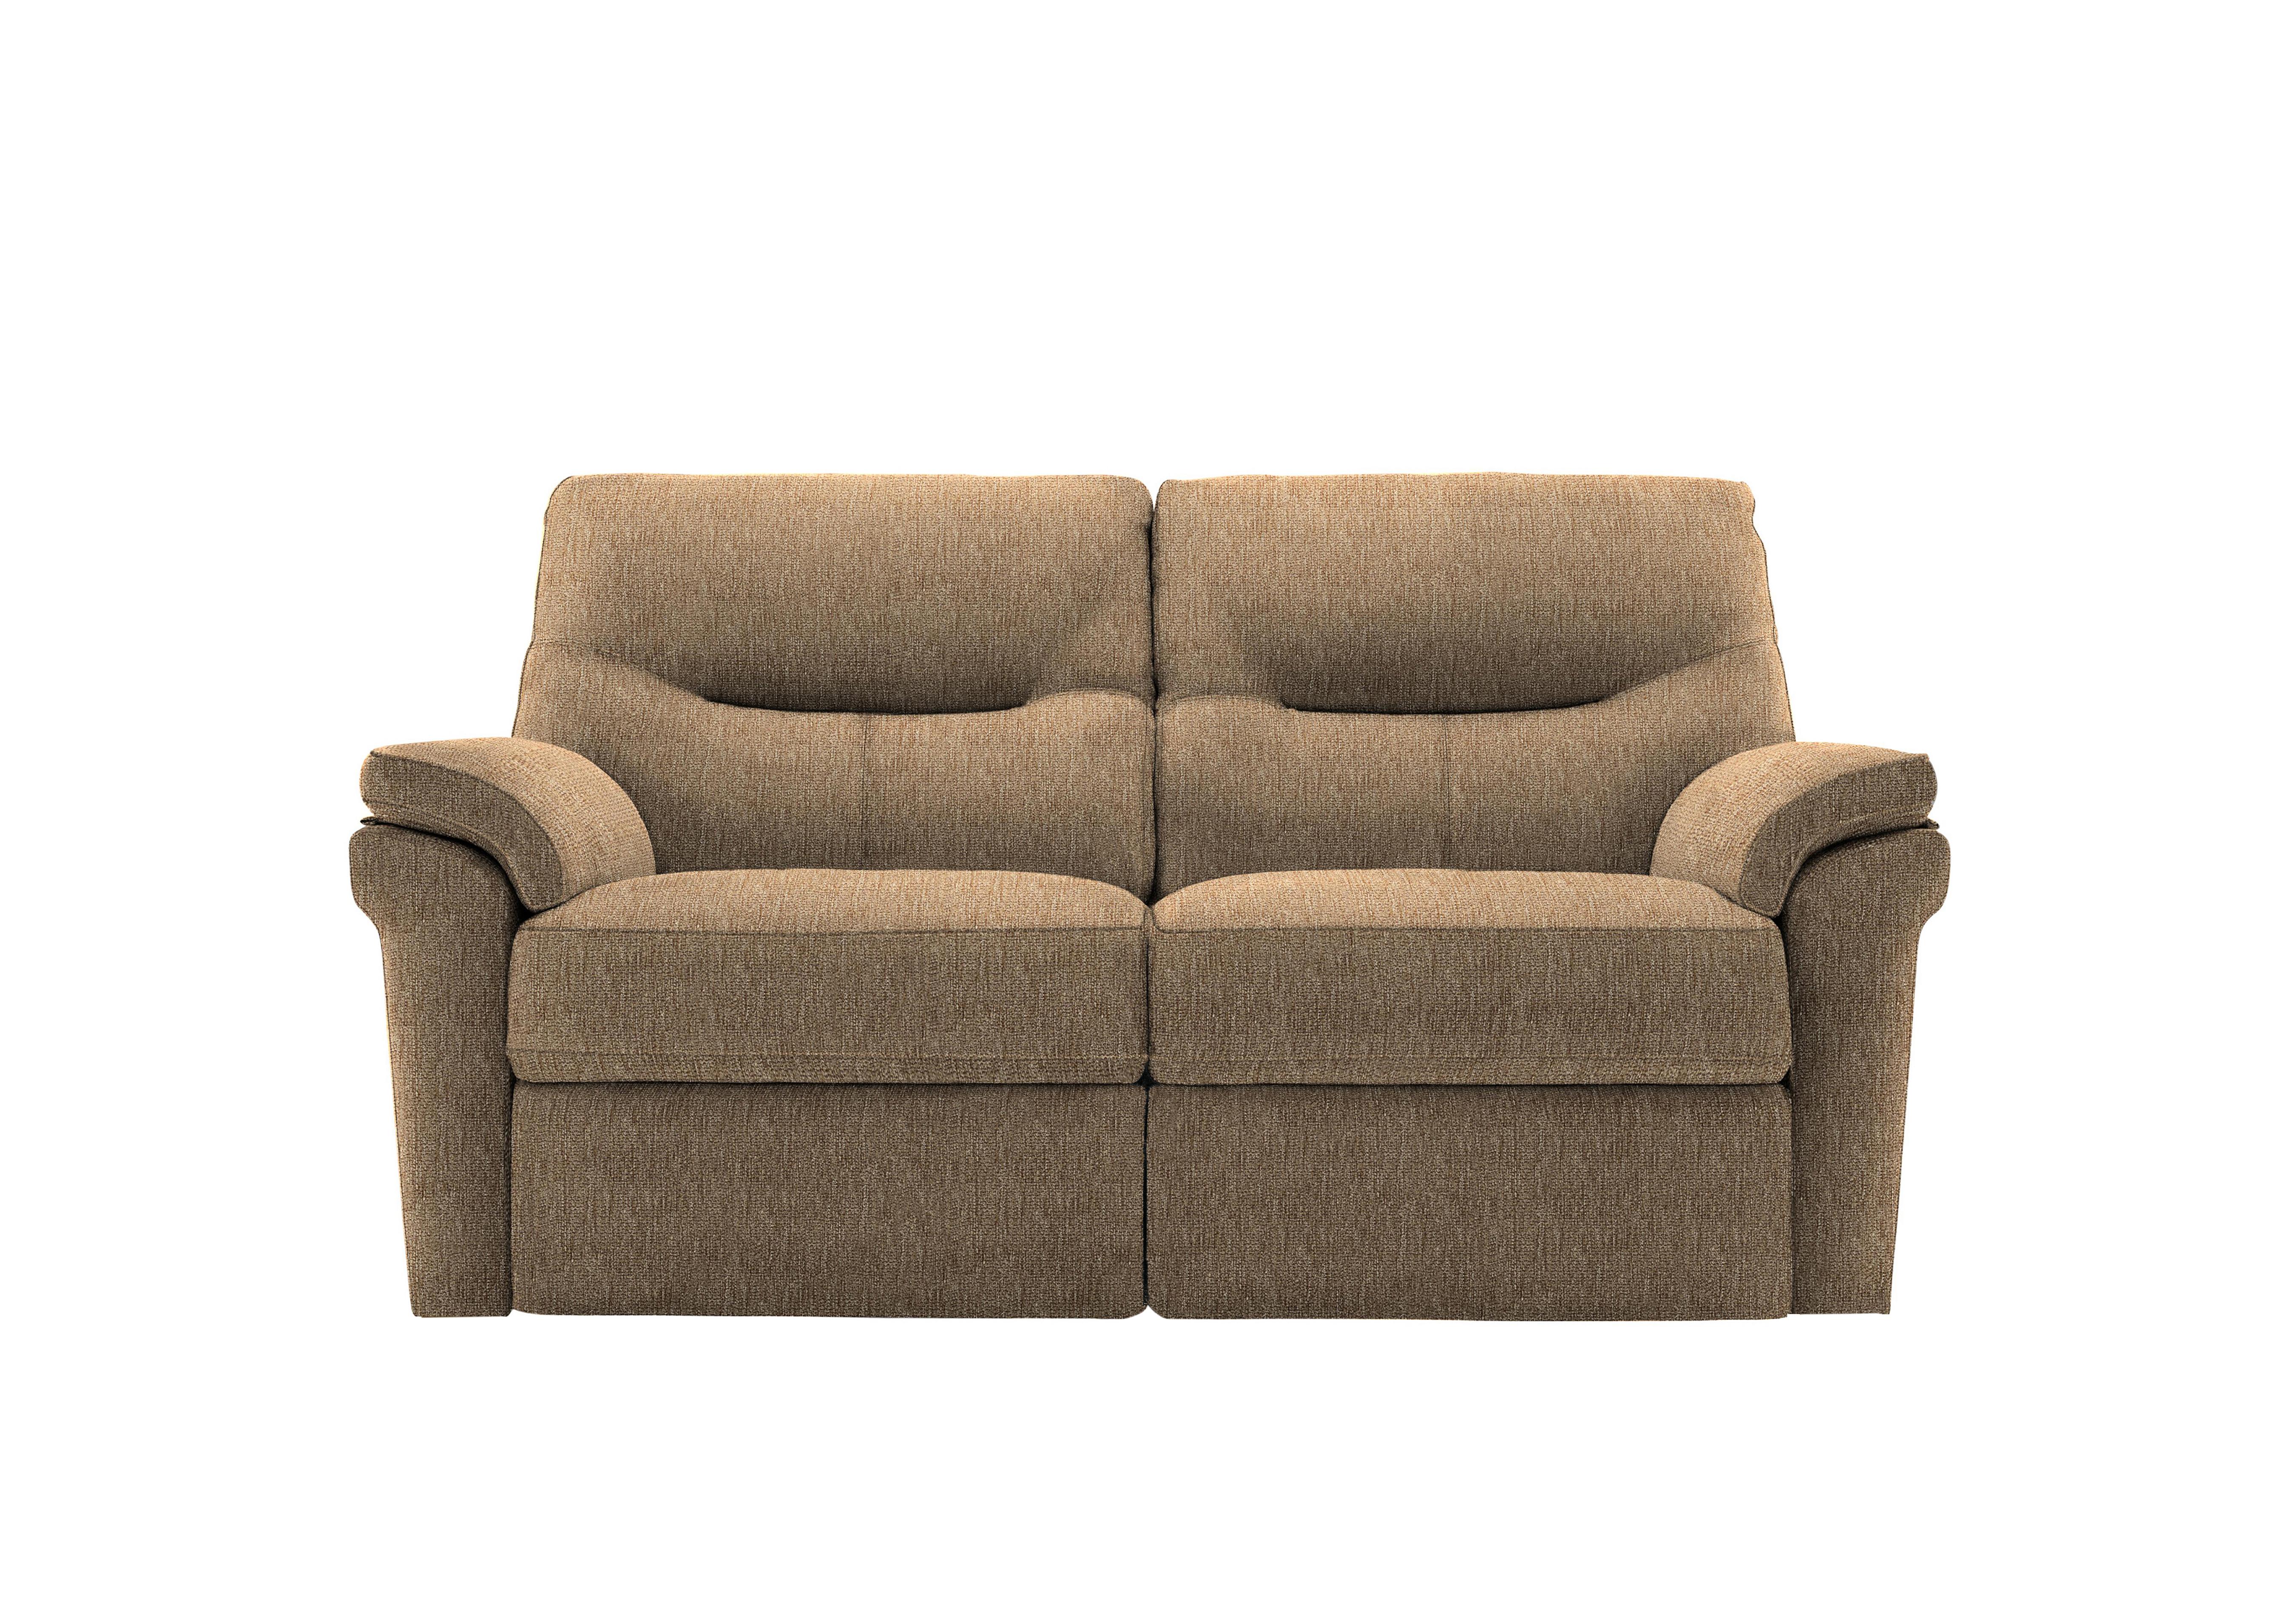 Seattle 2 Seater Fabric Power Recliner Sofa with Power Lumbar in A070 Boucle Cocoa on Furniture Village